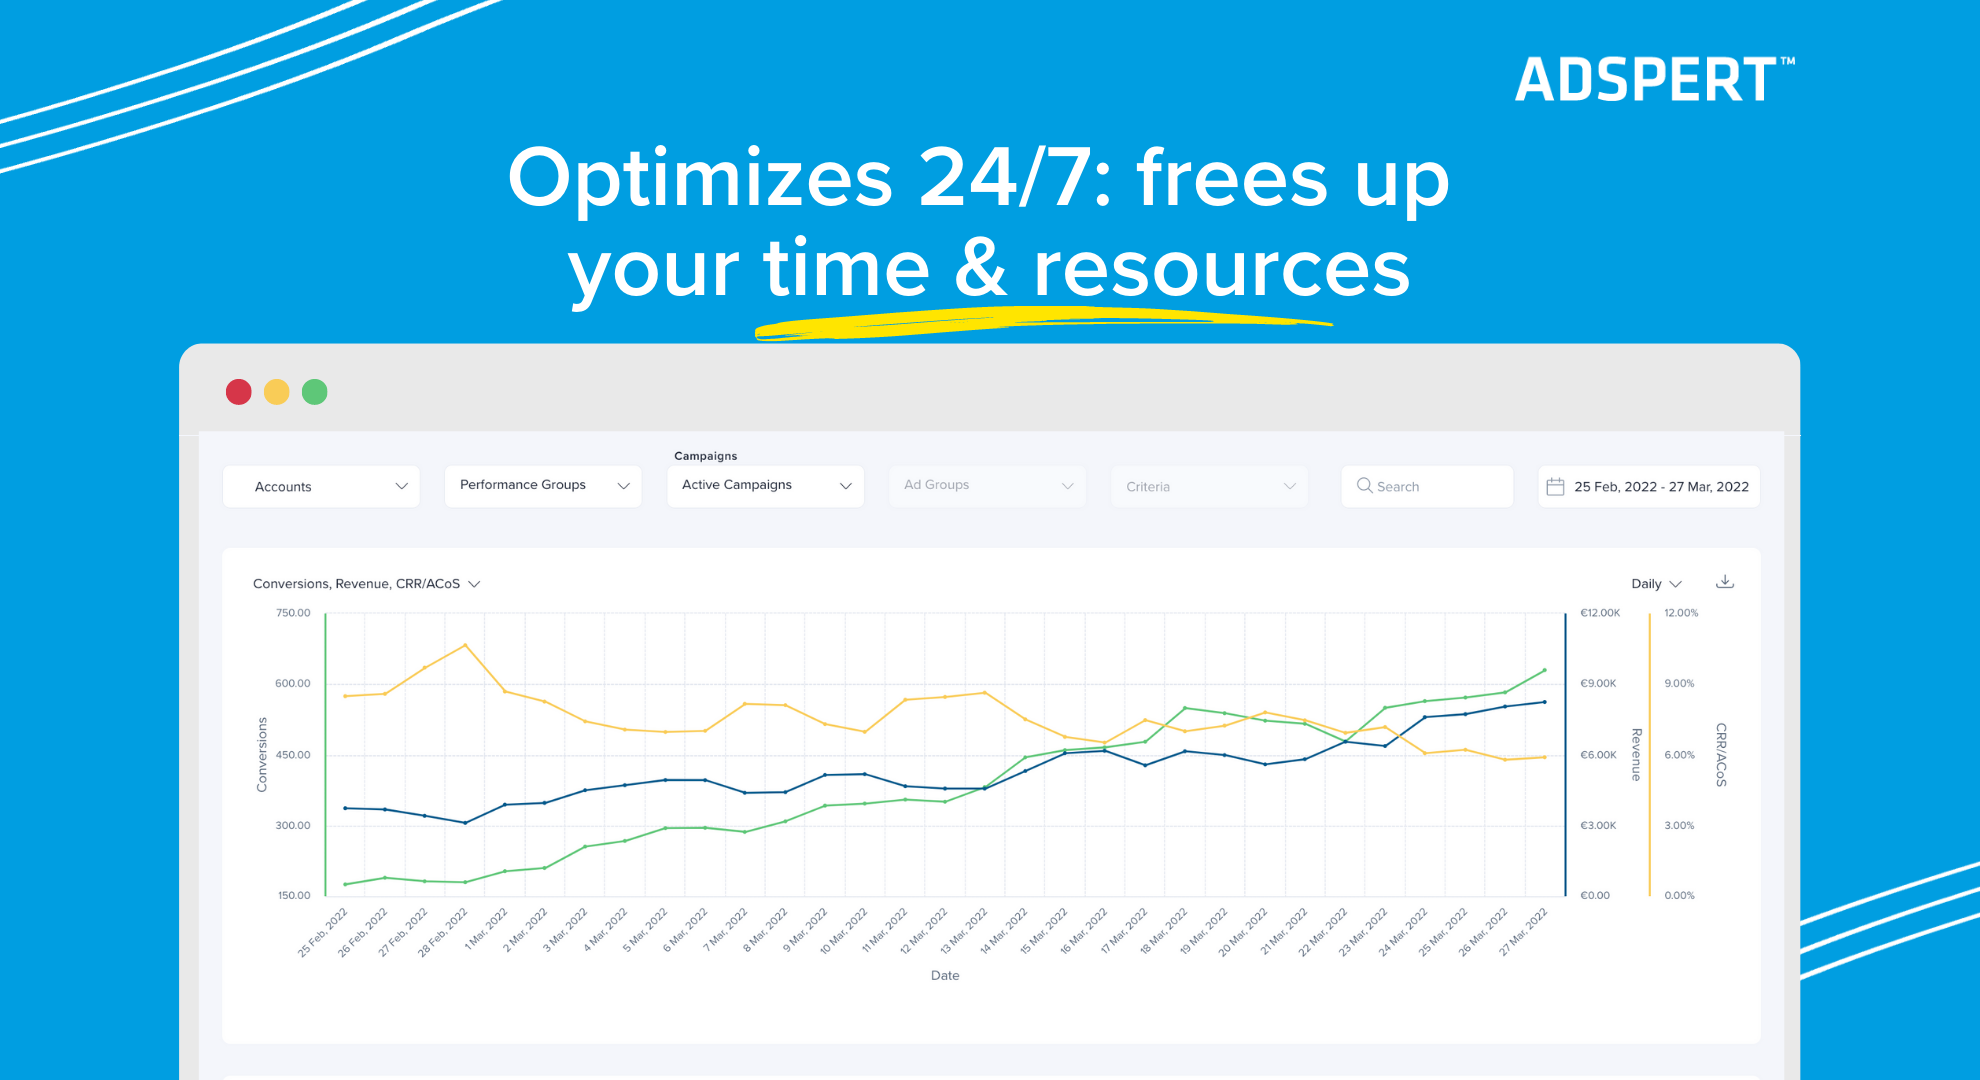 Adspert.net Optimizes 24-7-frees up your time and resources